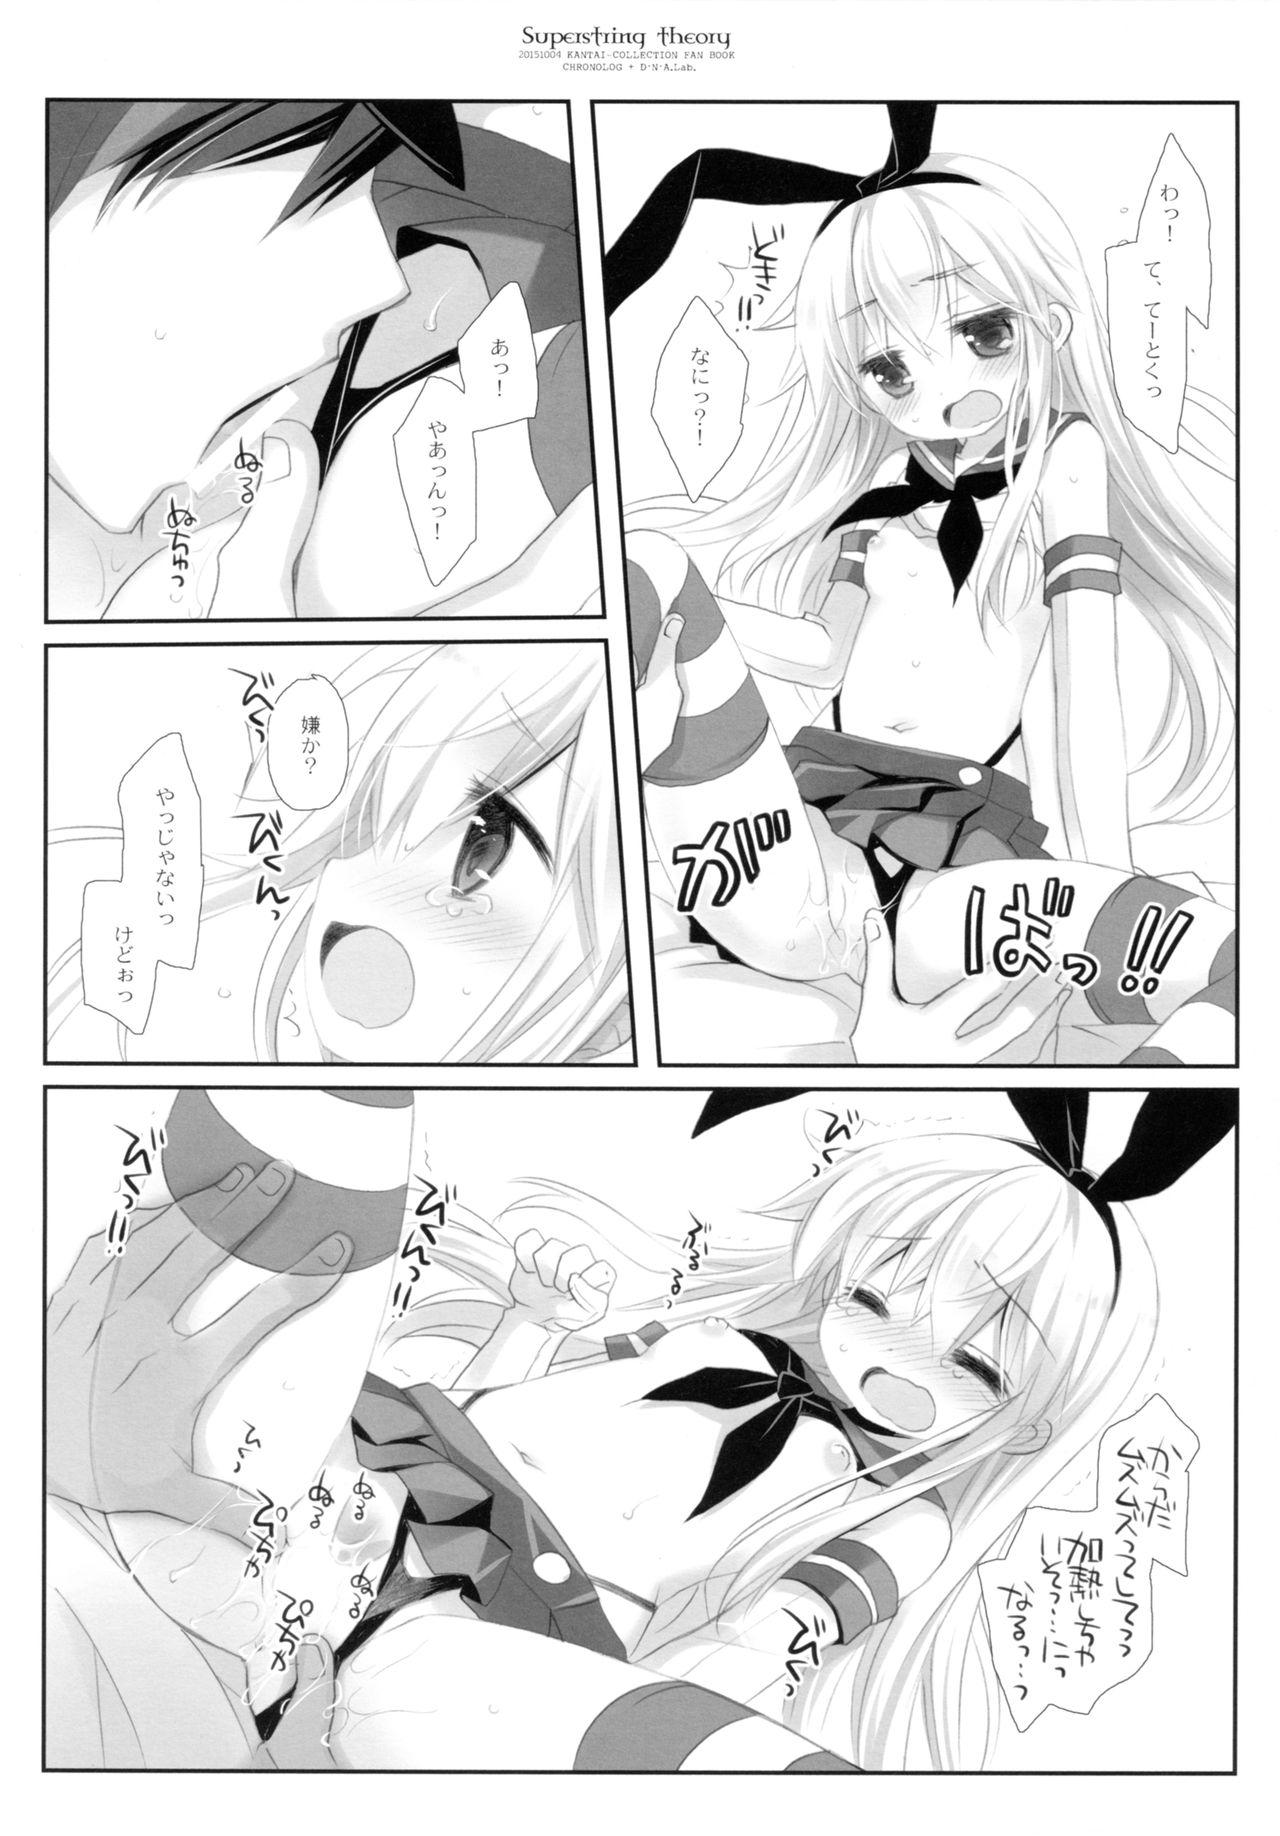 Trap Super String Theory - Kantai collection Pussysex - Page 7